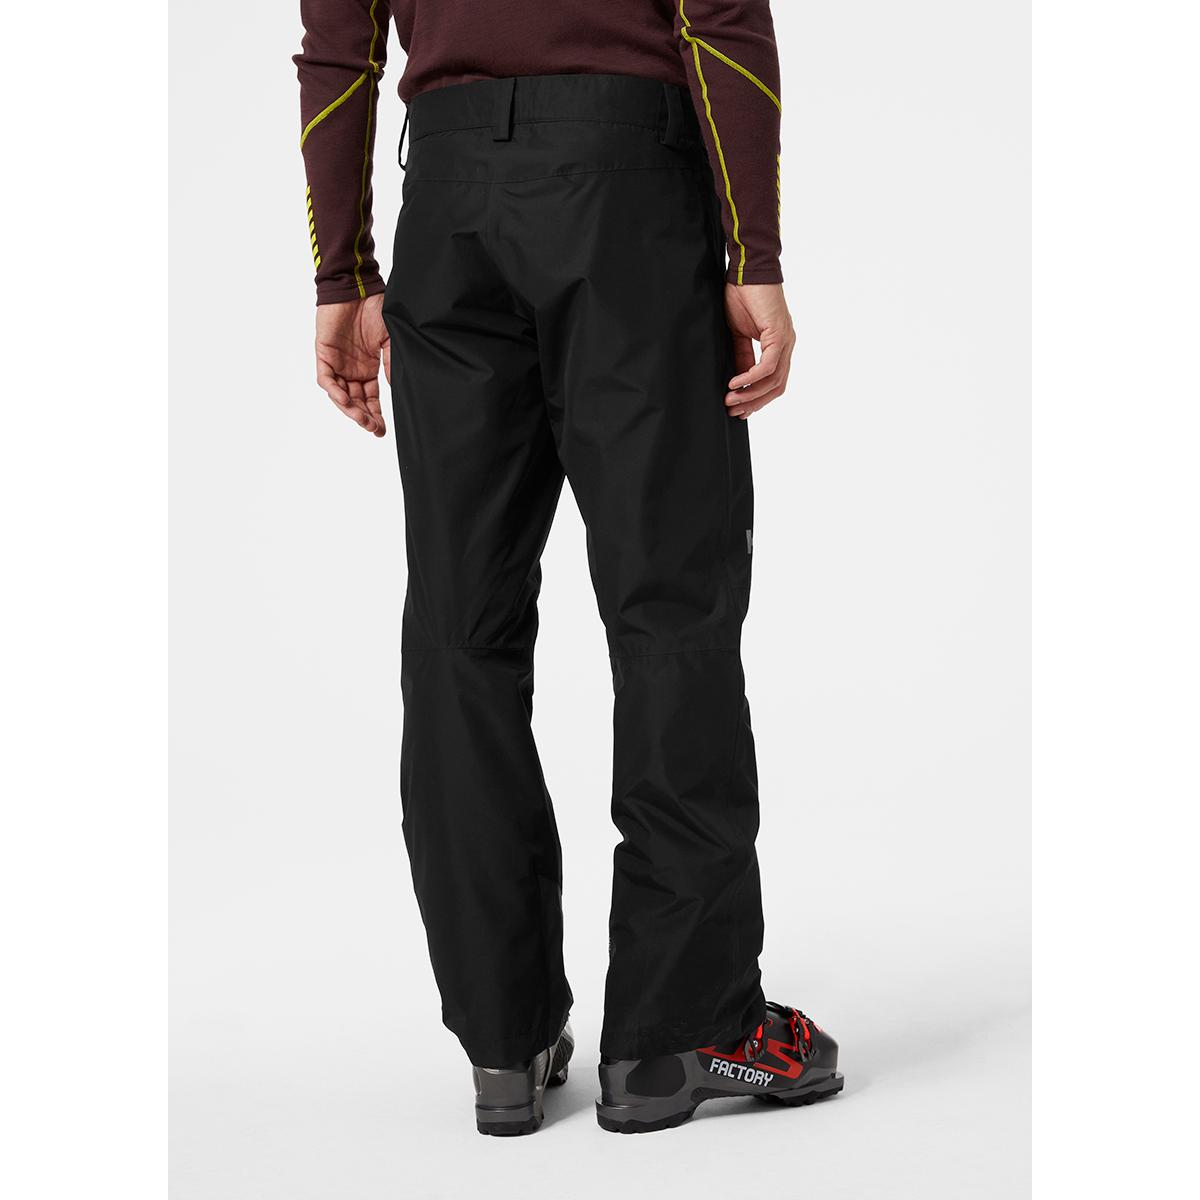 HELLY HANSEN BLIZZARD INSULATED PANTS